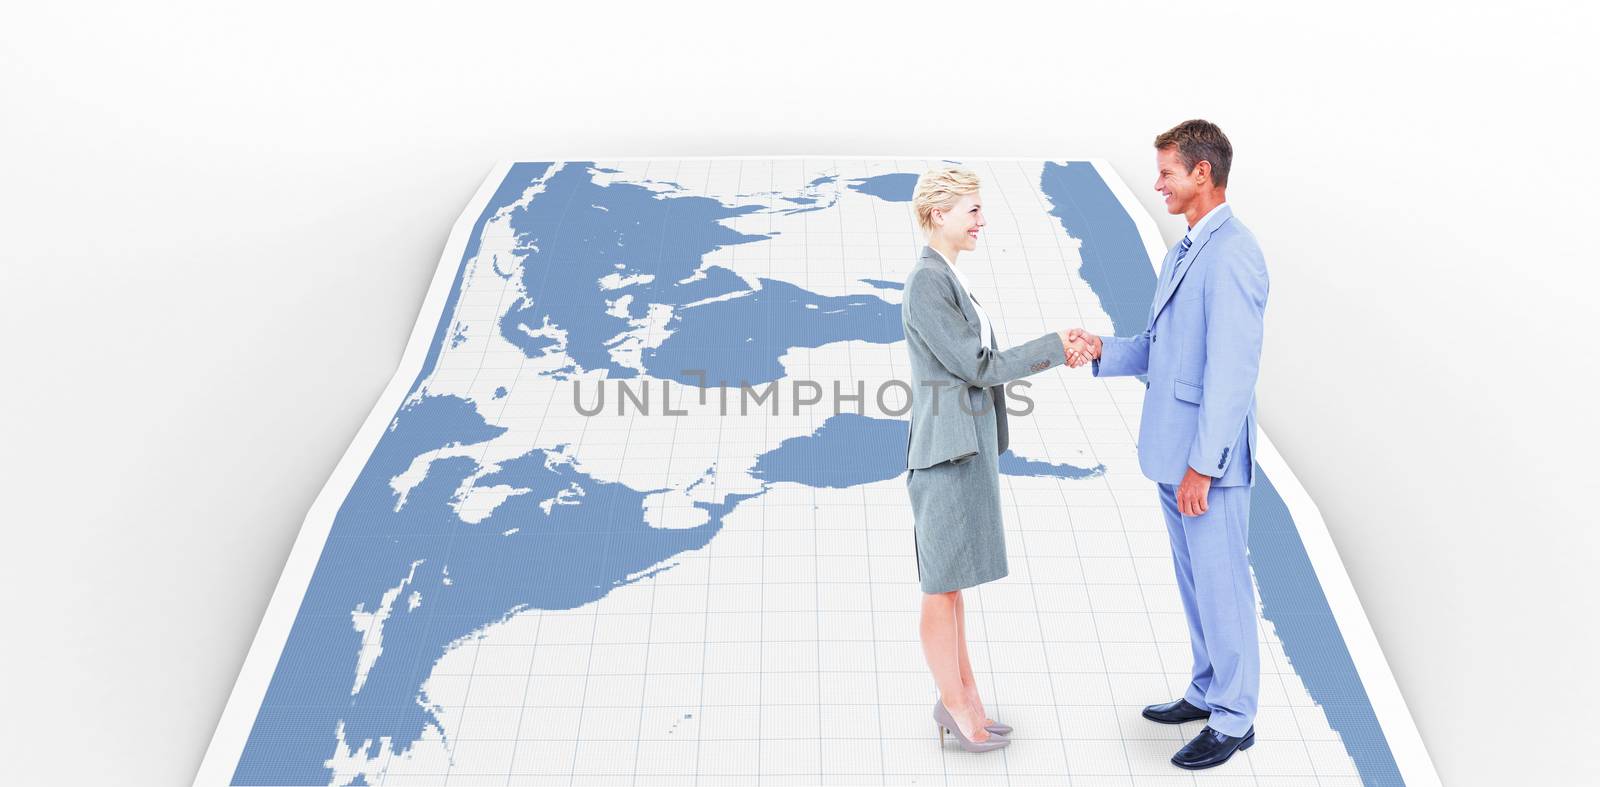 Smiling business people shaking hands against world map